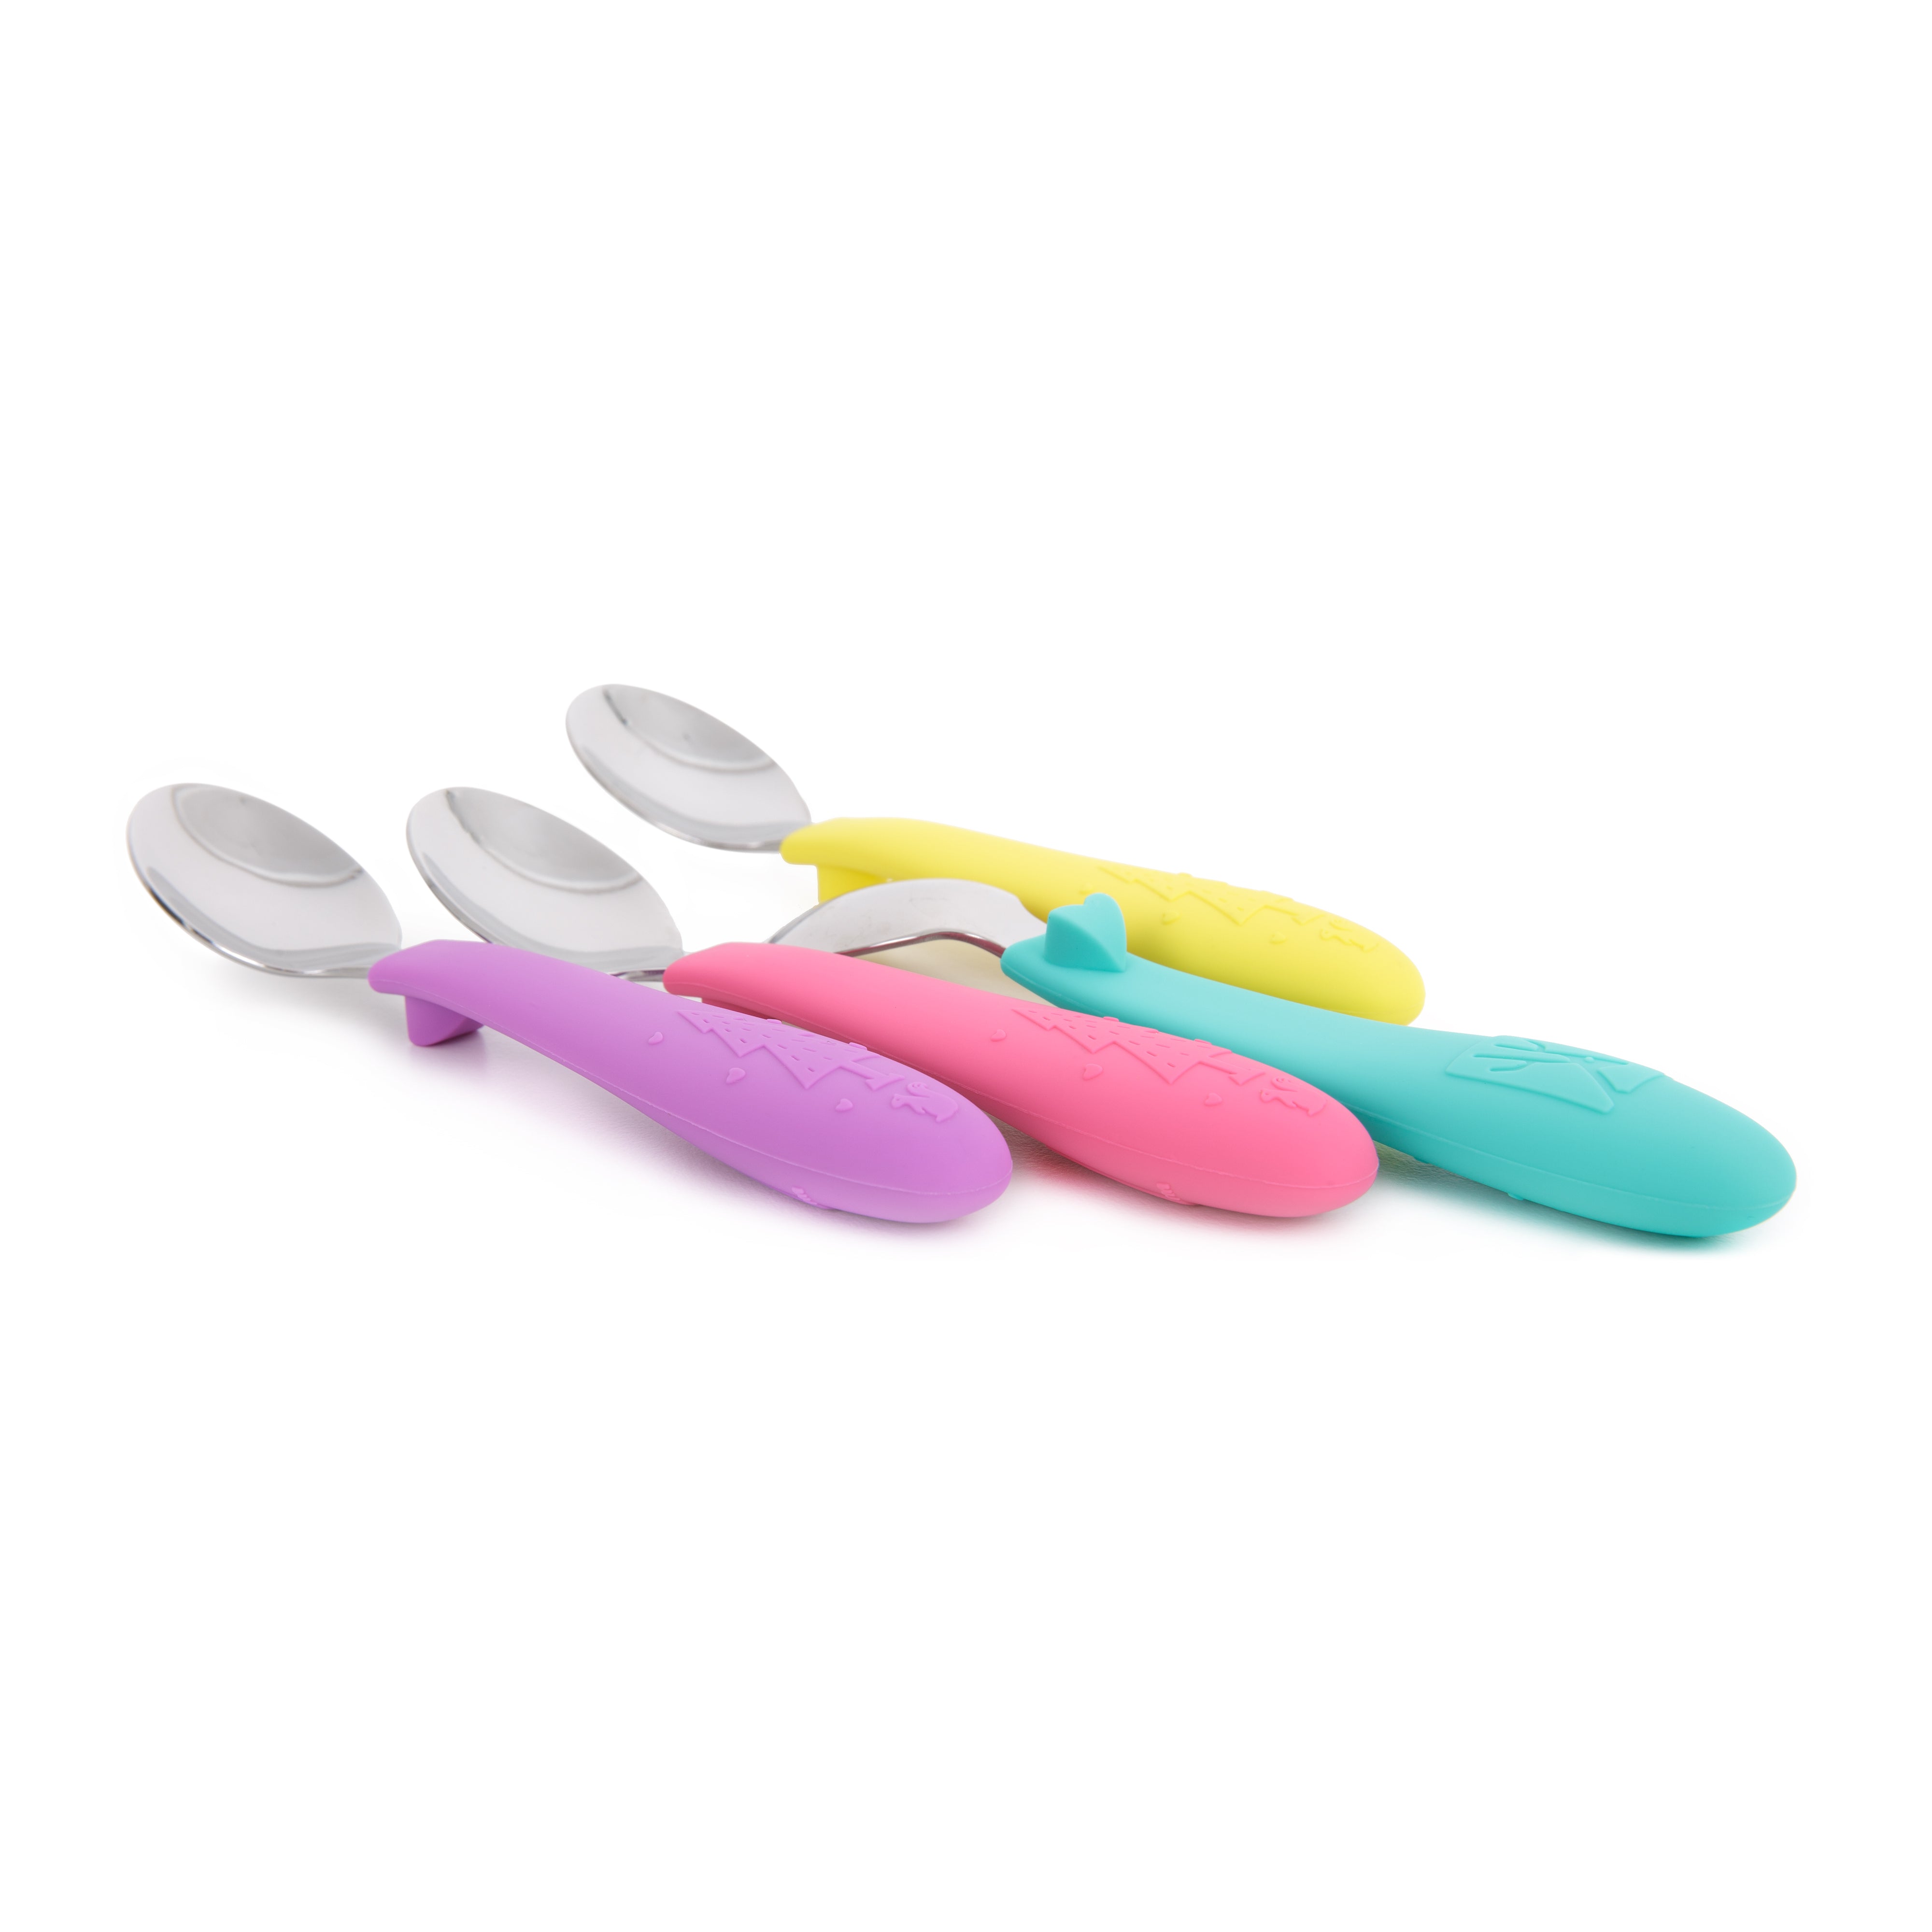 64454RG Spoons Set of 2 12 cm Copper colored Metal Children Tablespoons